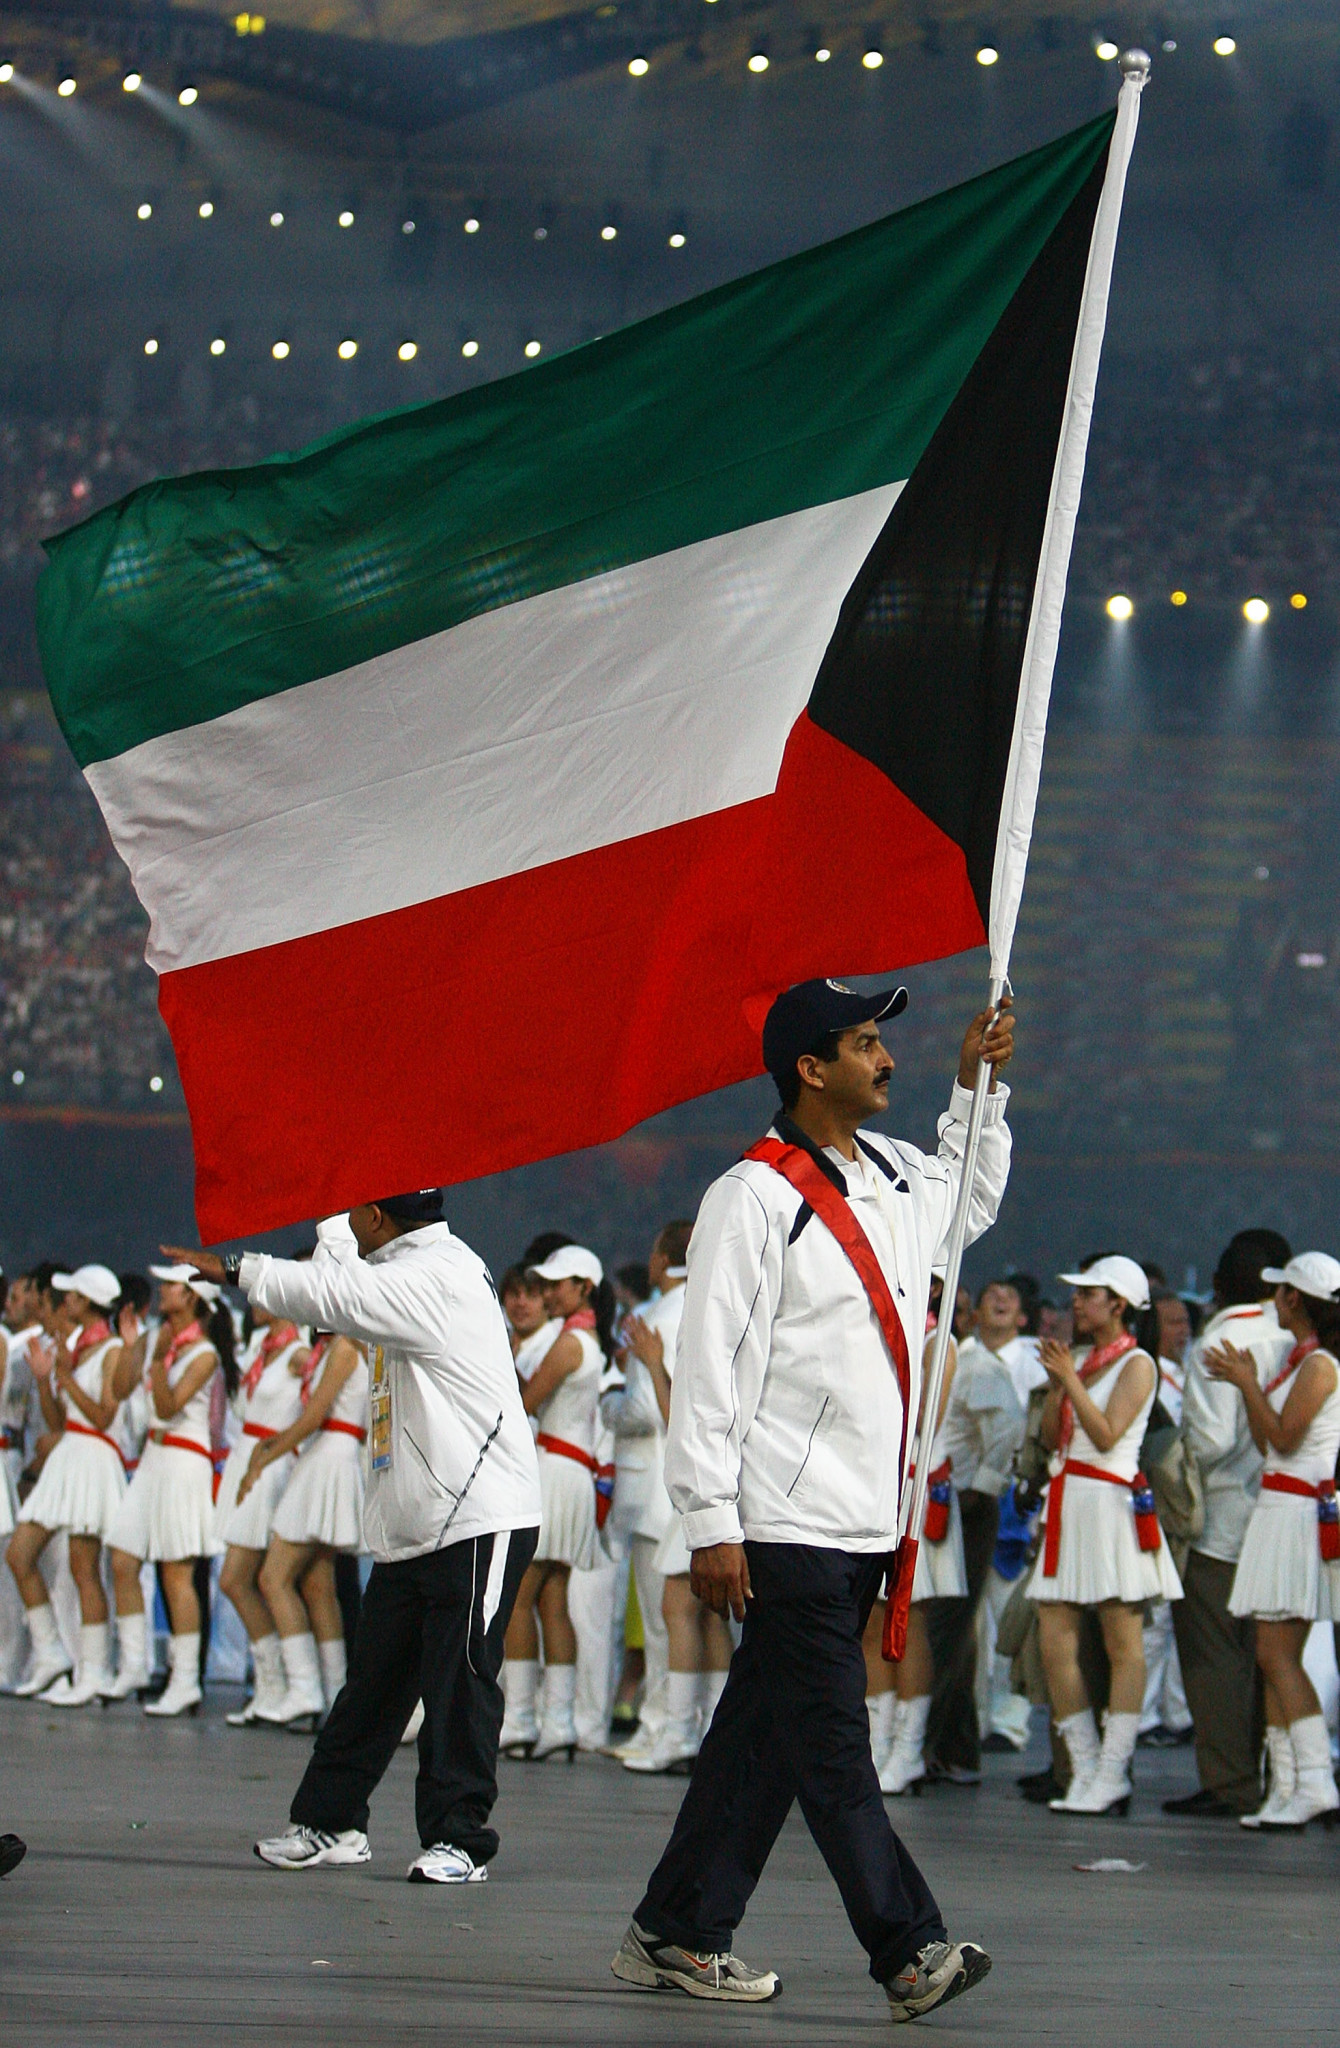 Kuwait is returning to the Olympic fold after its suspension was lifted in July ©Getty Images